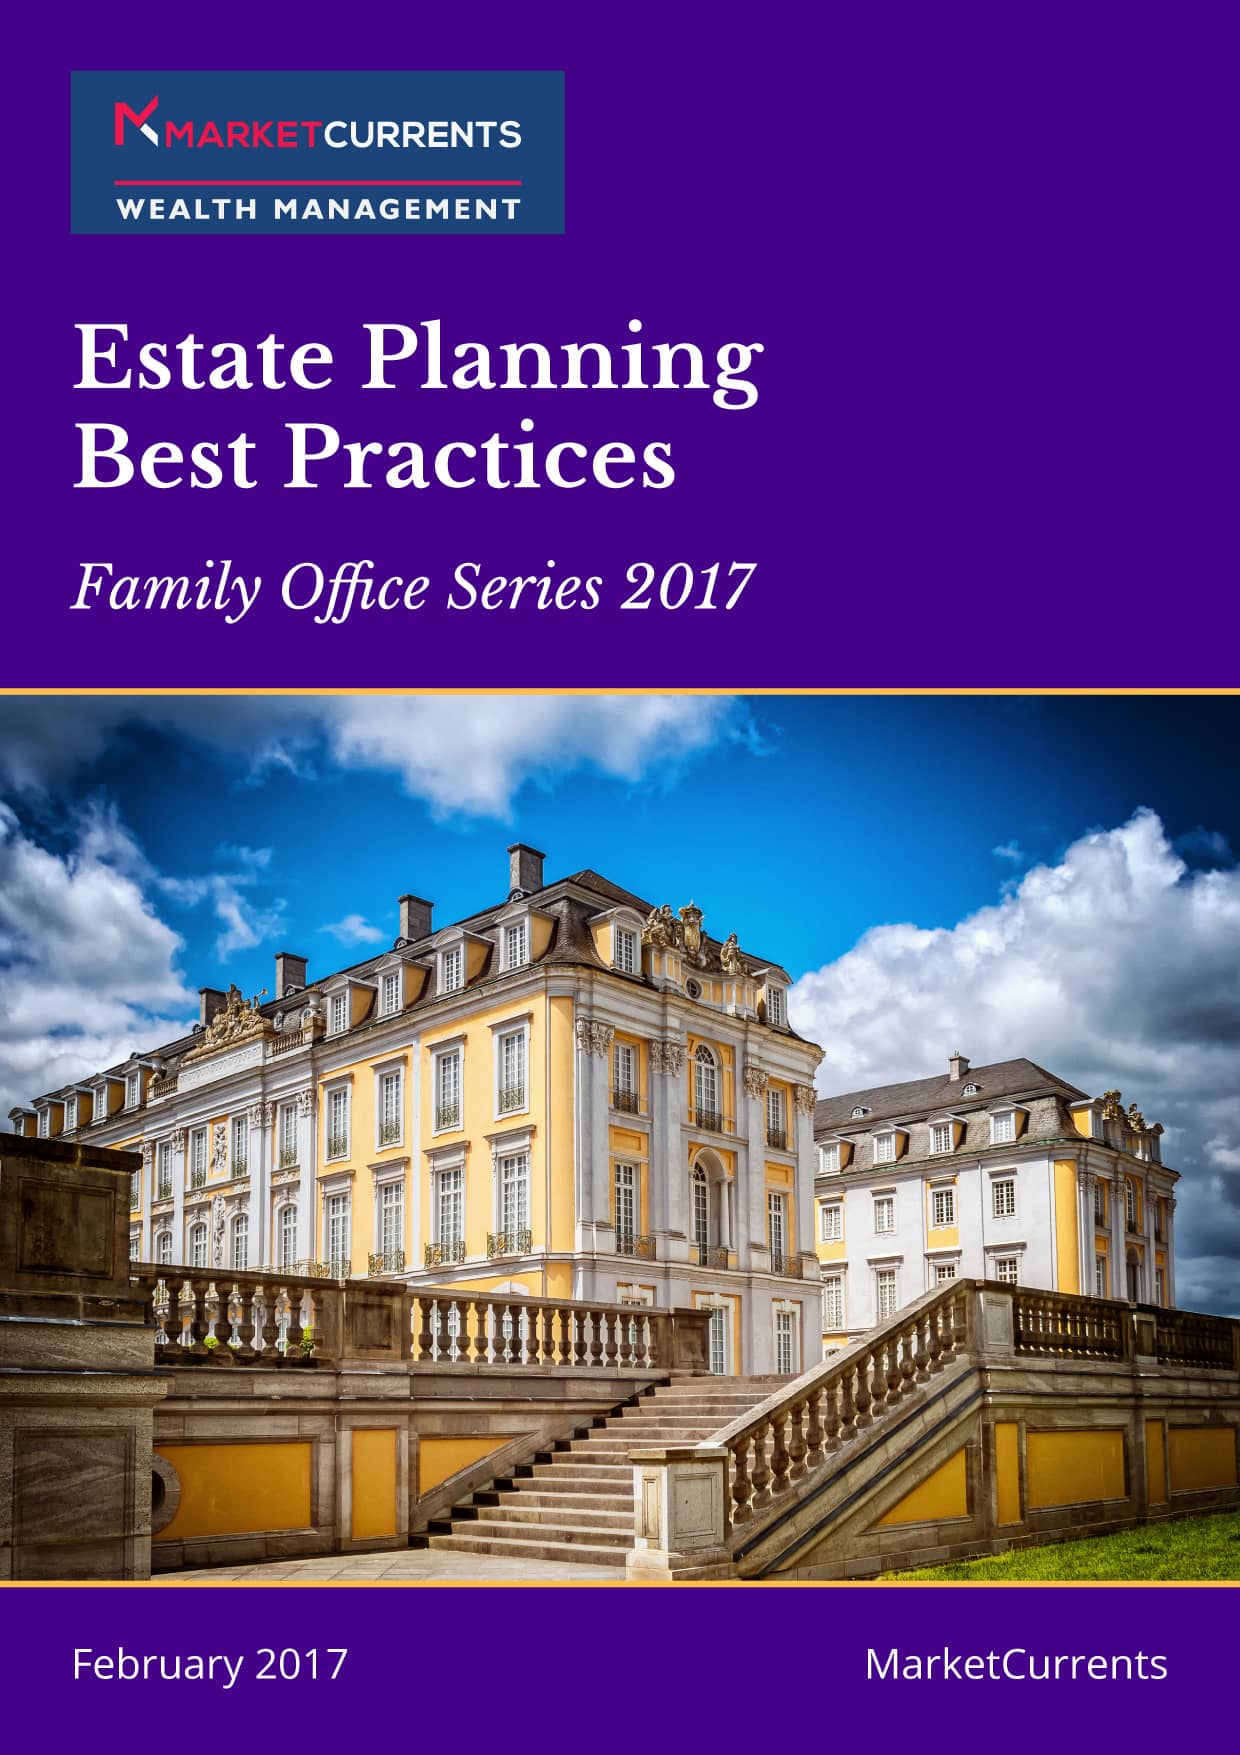 Estate Planning Best Practices: February 2017